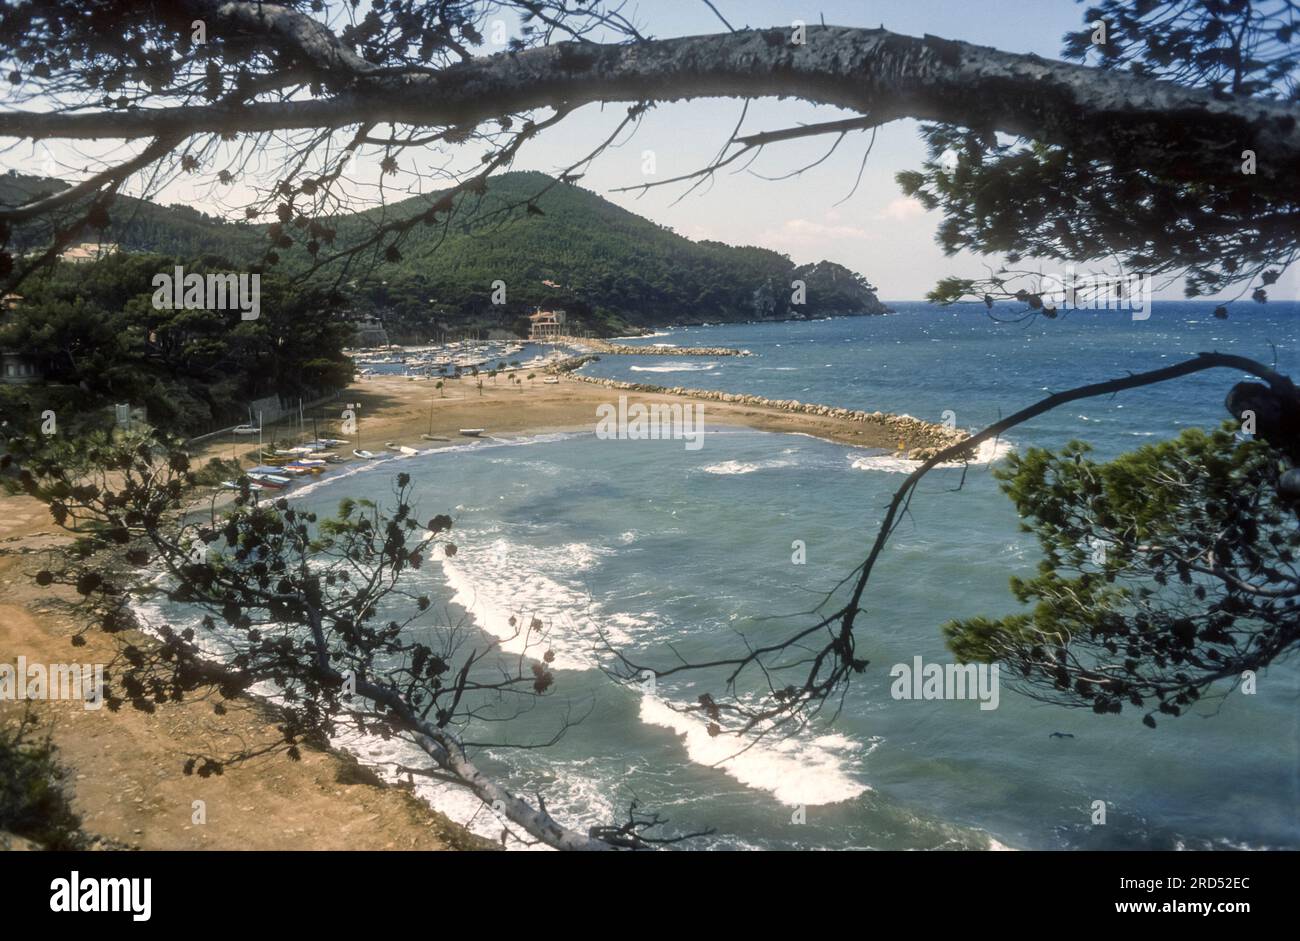 1976 archive photograph of the small port of La Madrague, part of Saint-Cyr-sur-Mer in the south of France. Stock Photo